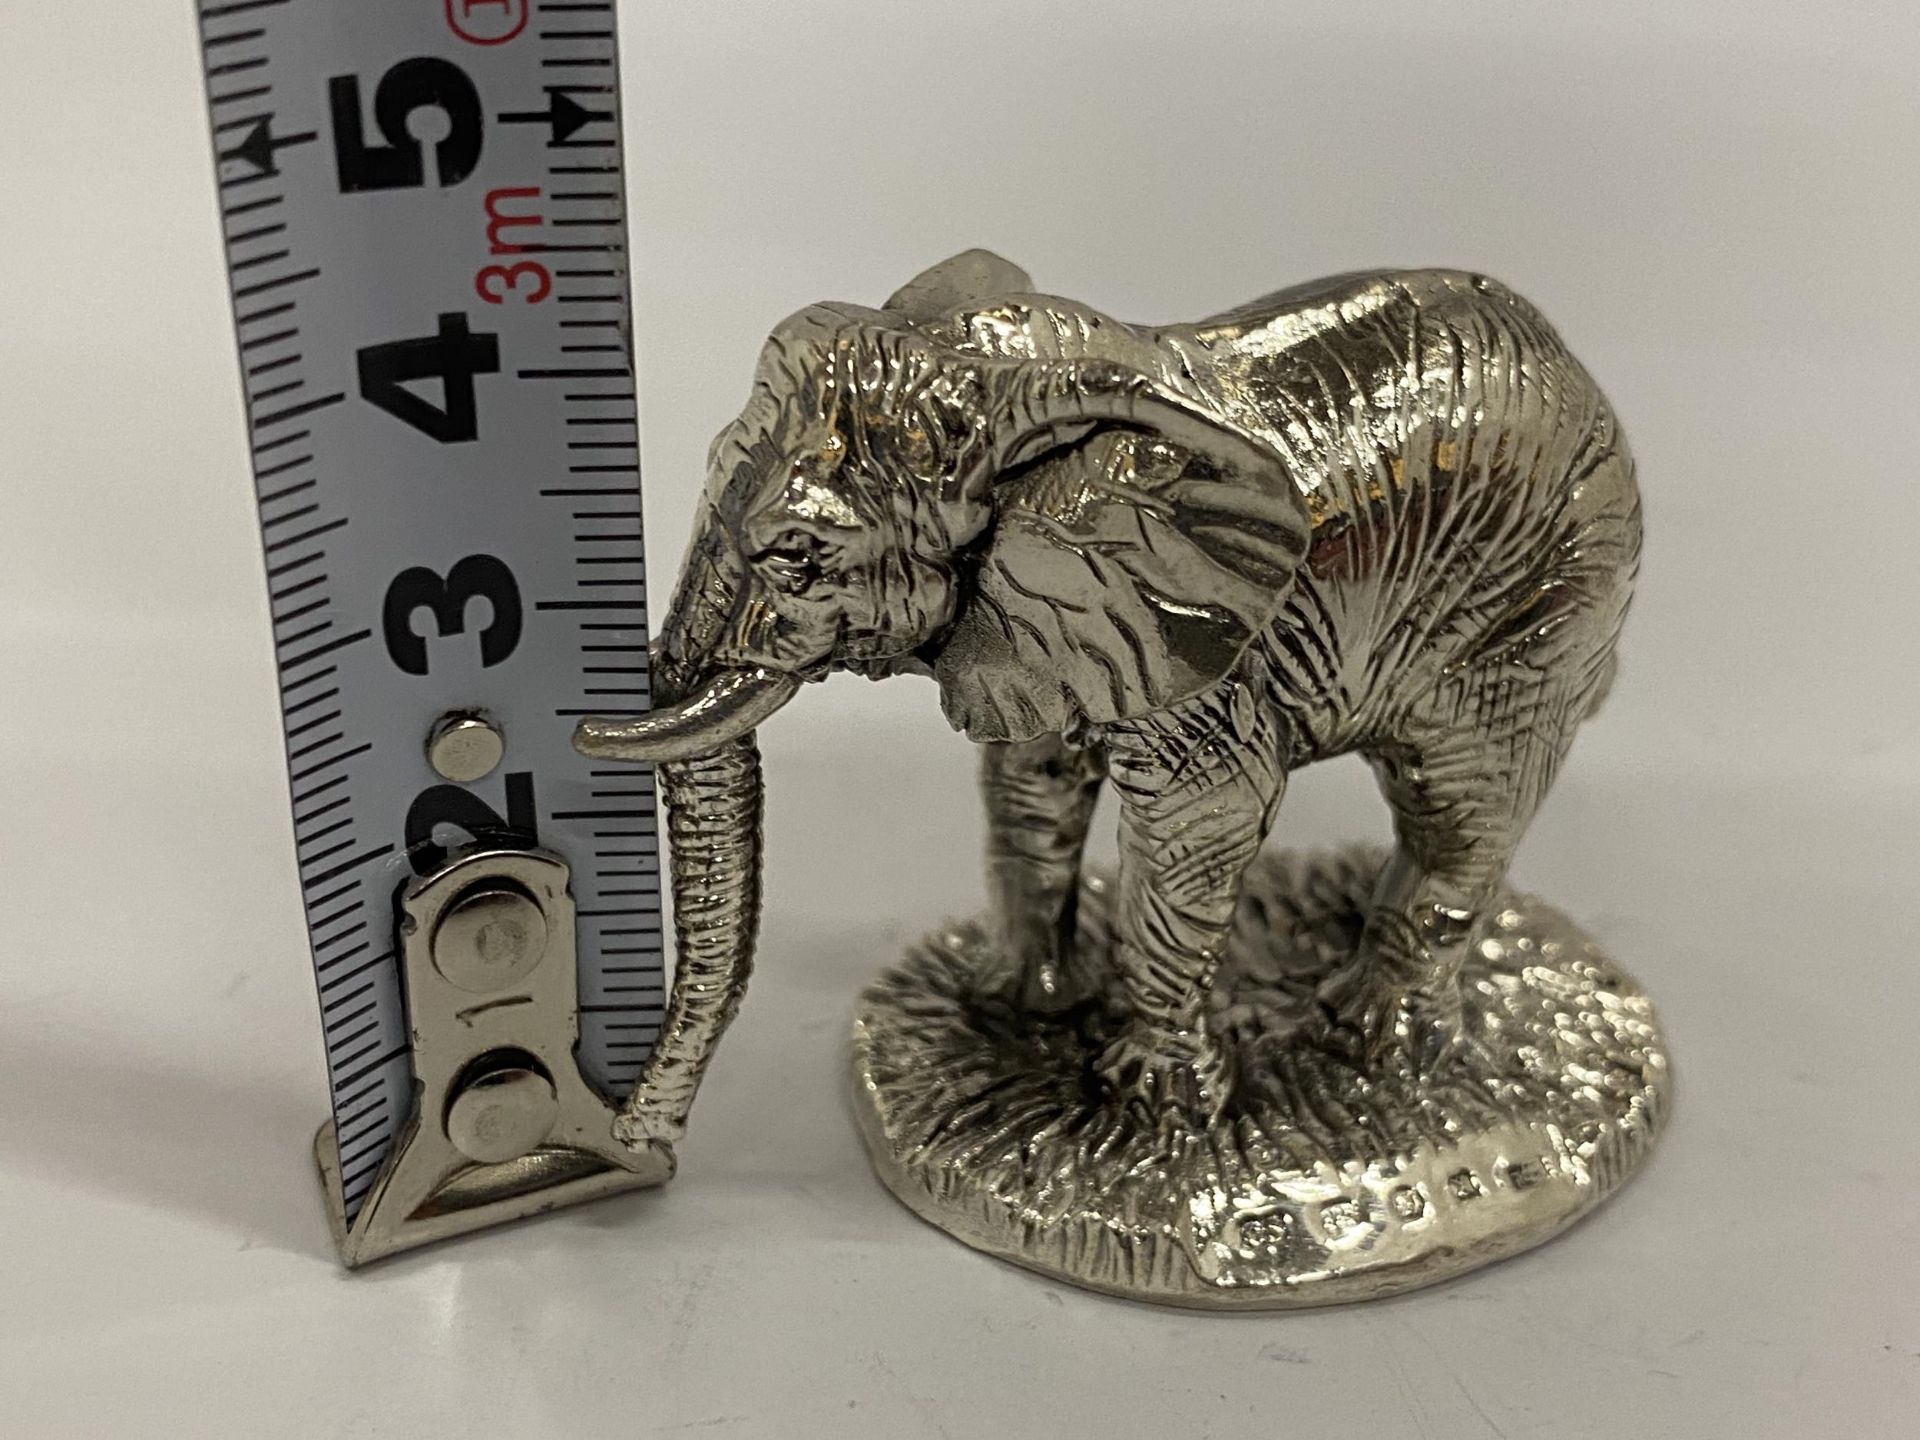 A HALLMARKED SILVER FILLED CAMELOT SILVERWARE LTD ELEPHANT FIGURE - Image 4 of 4